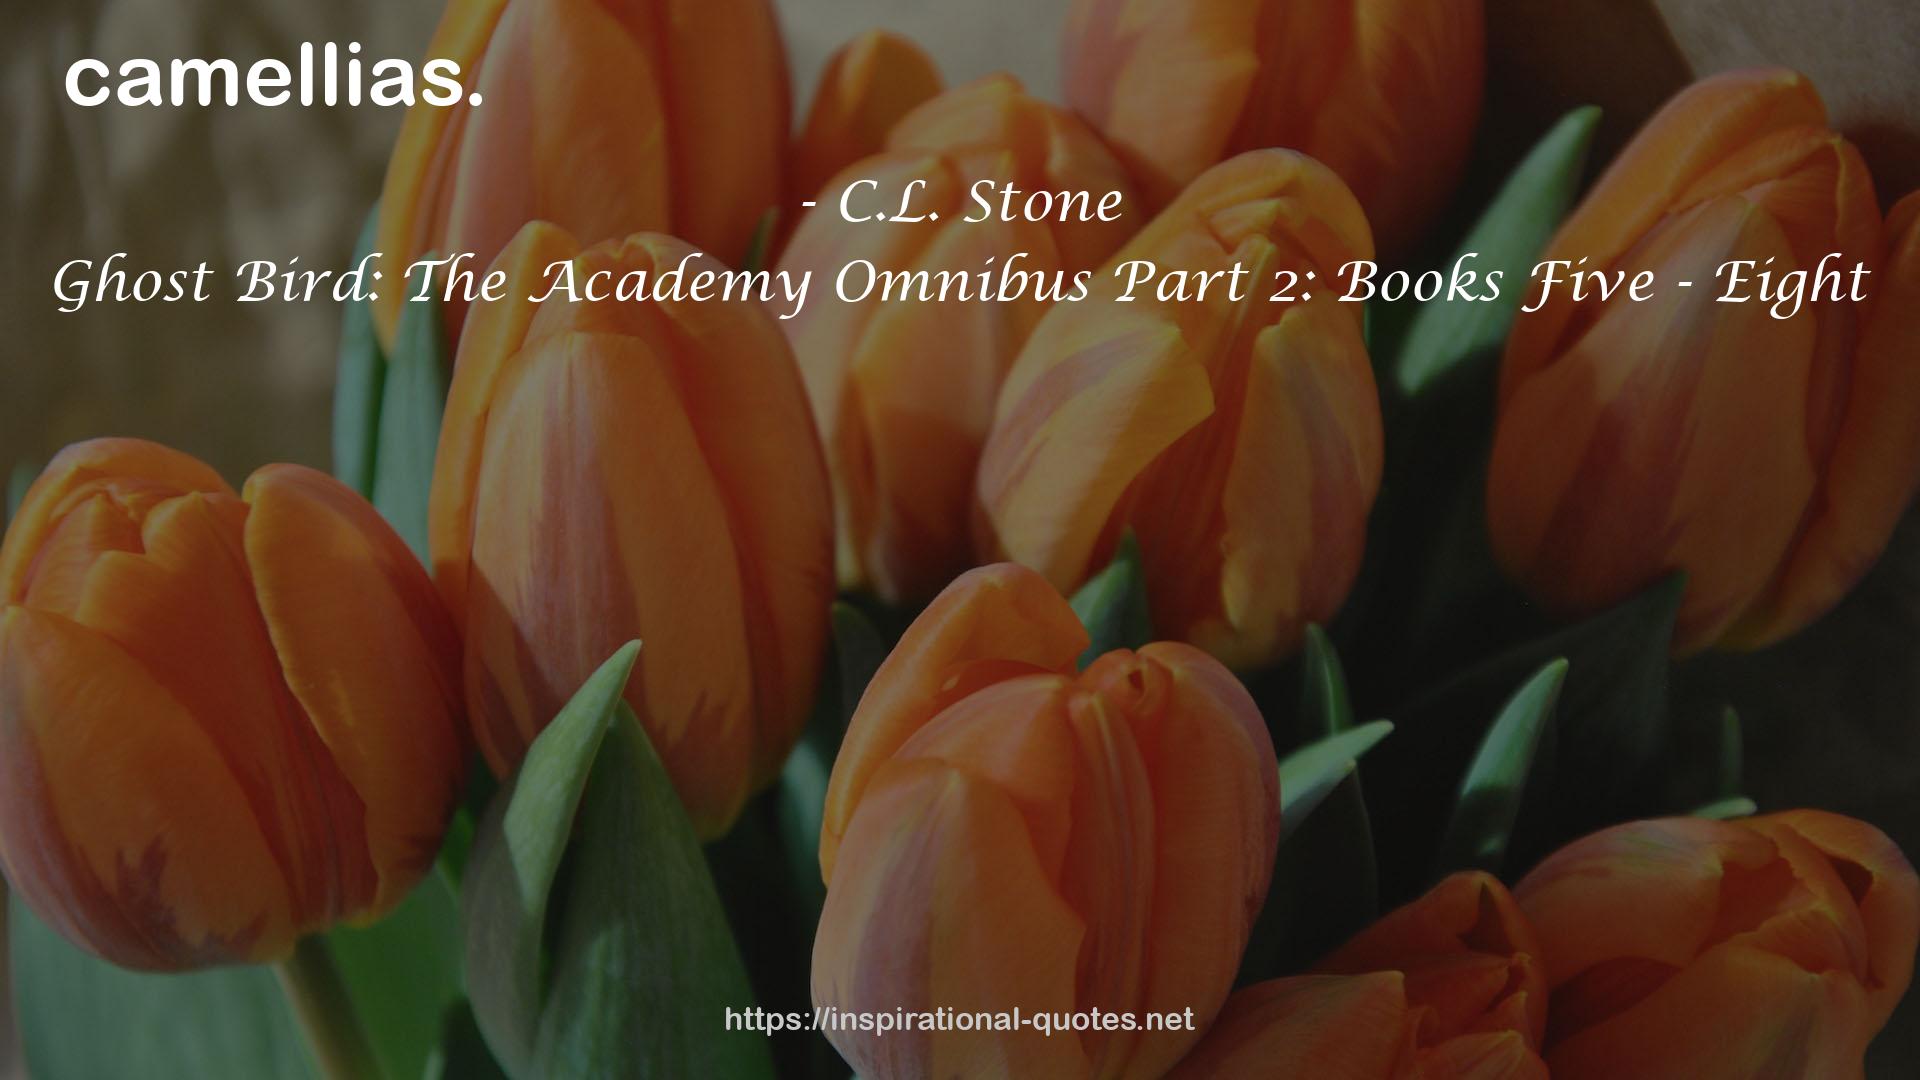 Ghost Bird: The Academy Omnibus Part 2: Books Five - Eight QUOTES